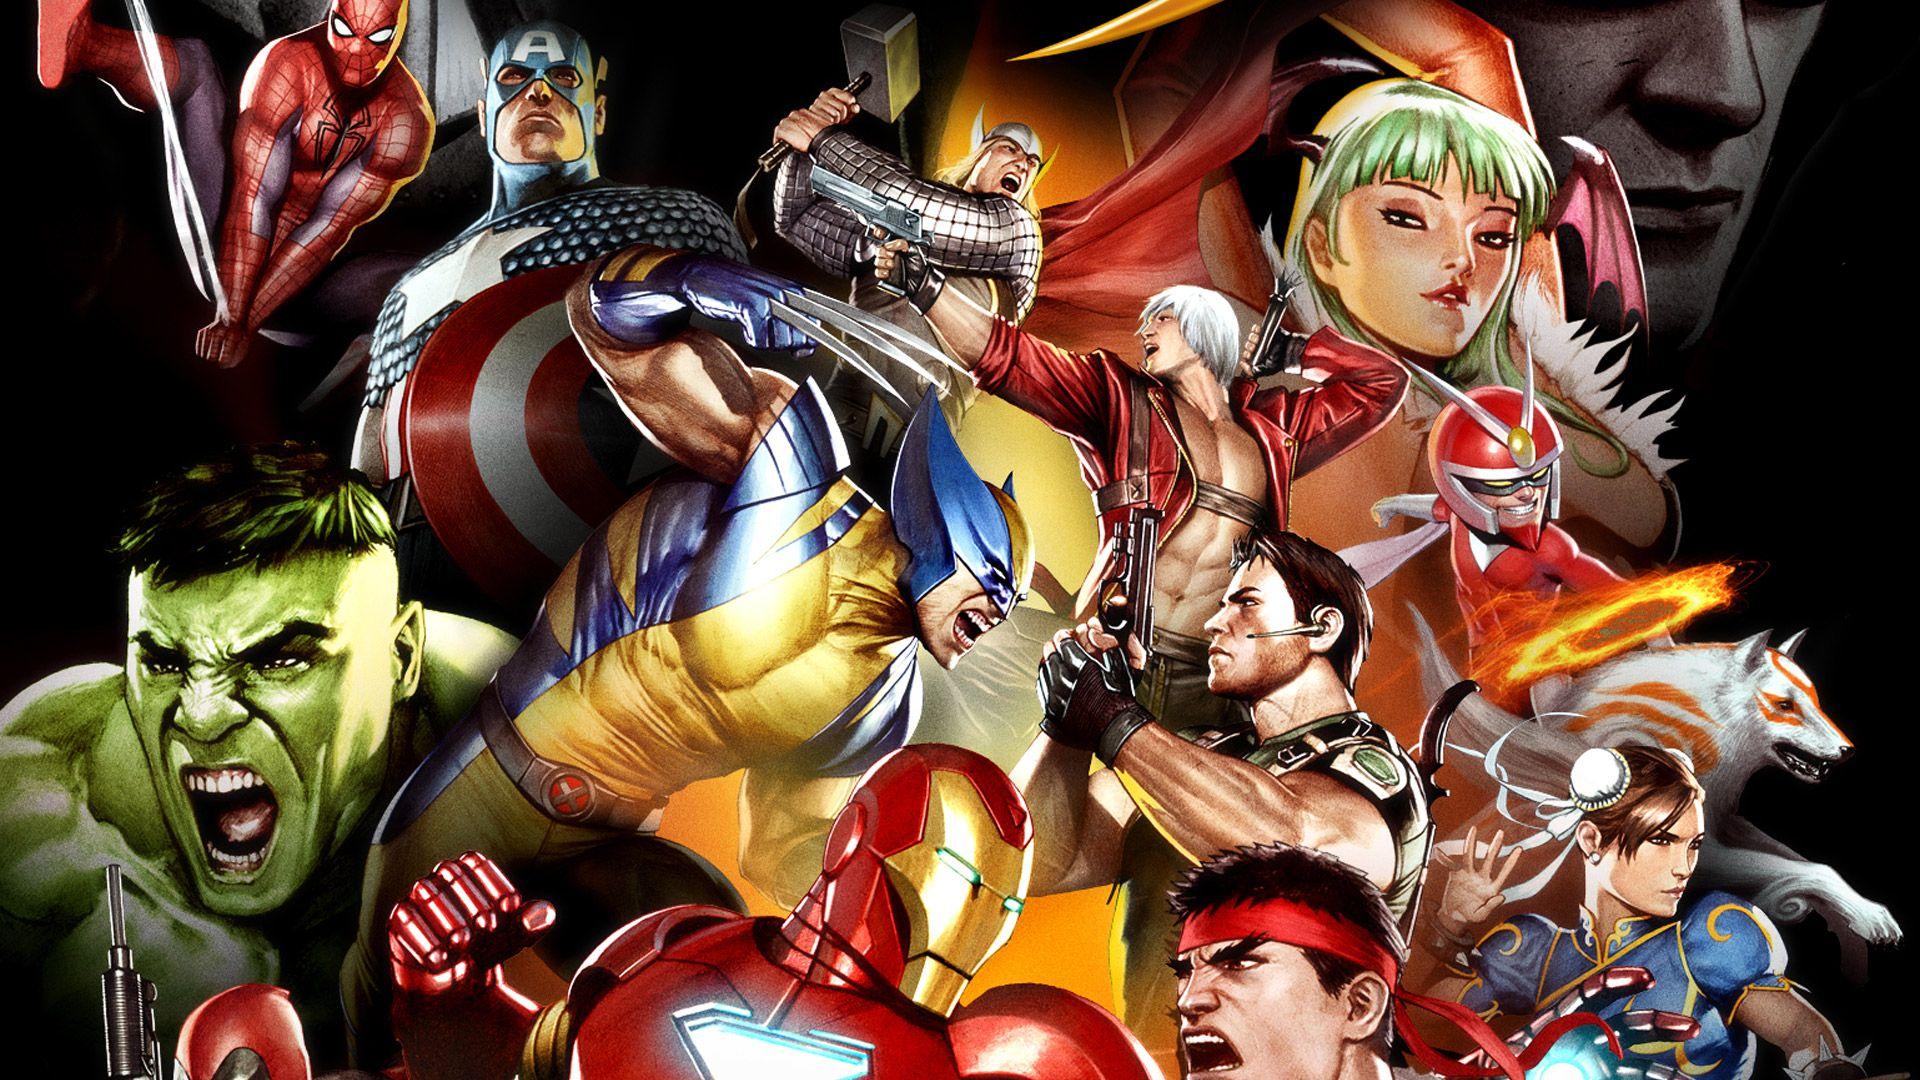 Ultimate Marvel vs. Capcom 3 Date Revealed for Xbox One and PC